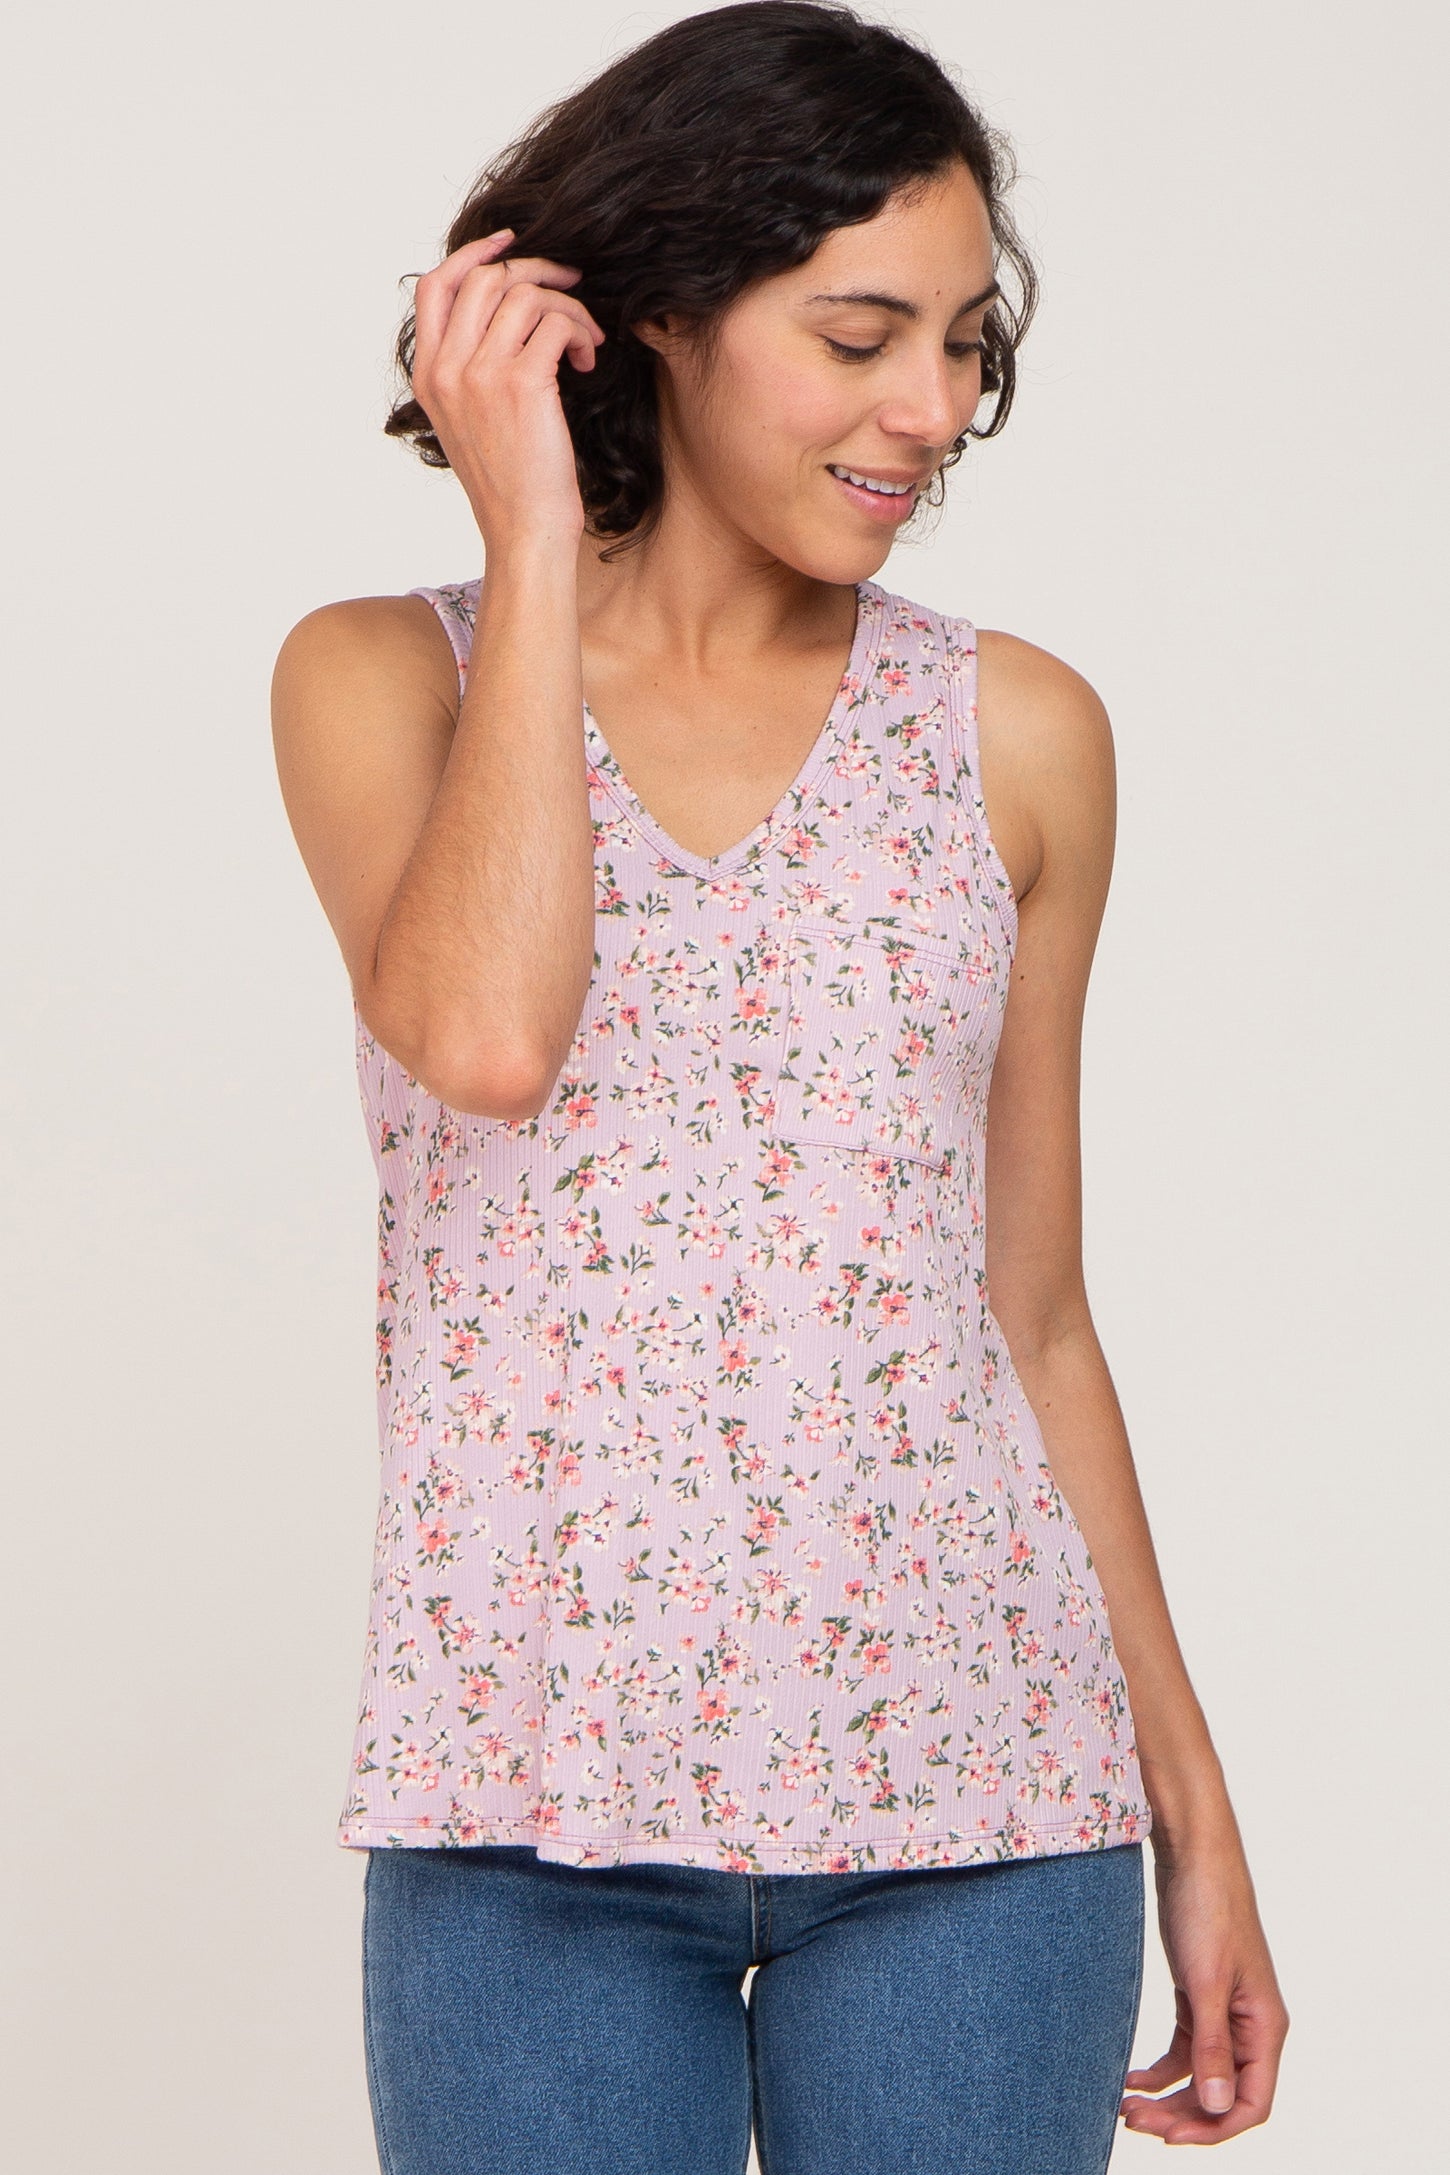 Lavender Floral Sleeveless Ribbed Maternity Top– PinkBlush